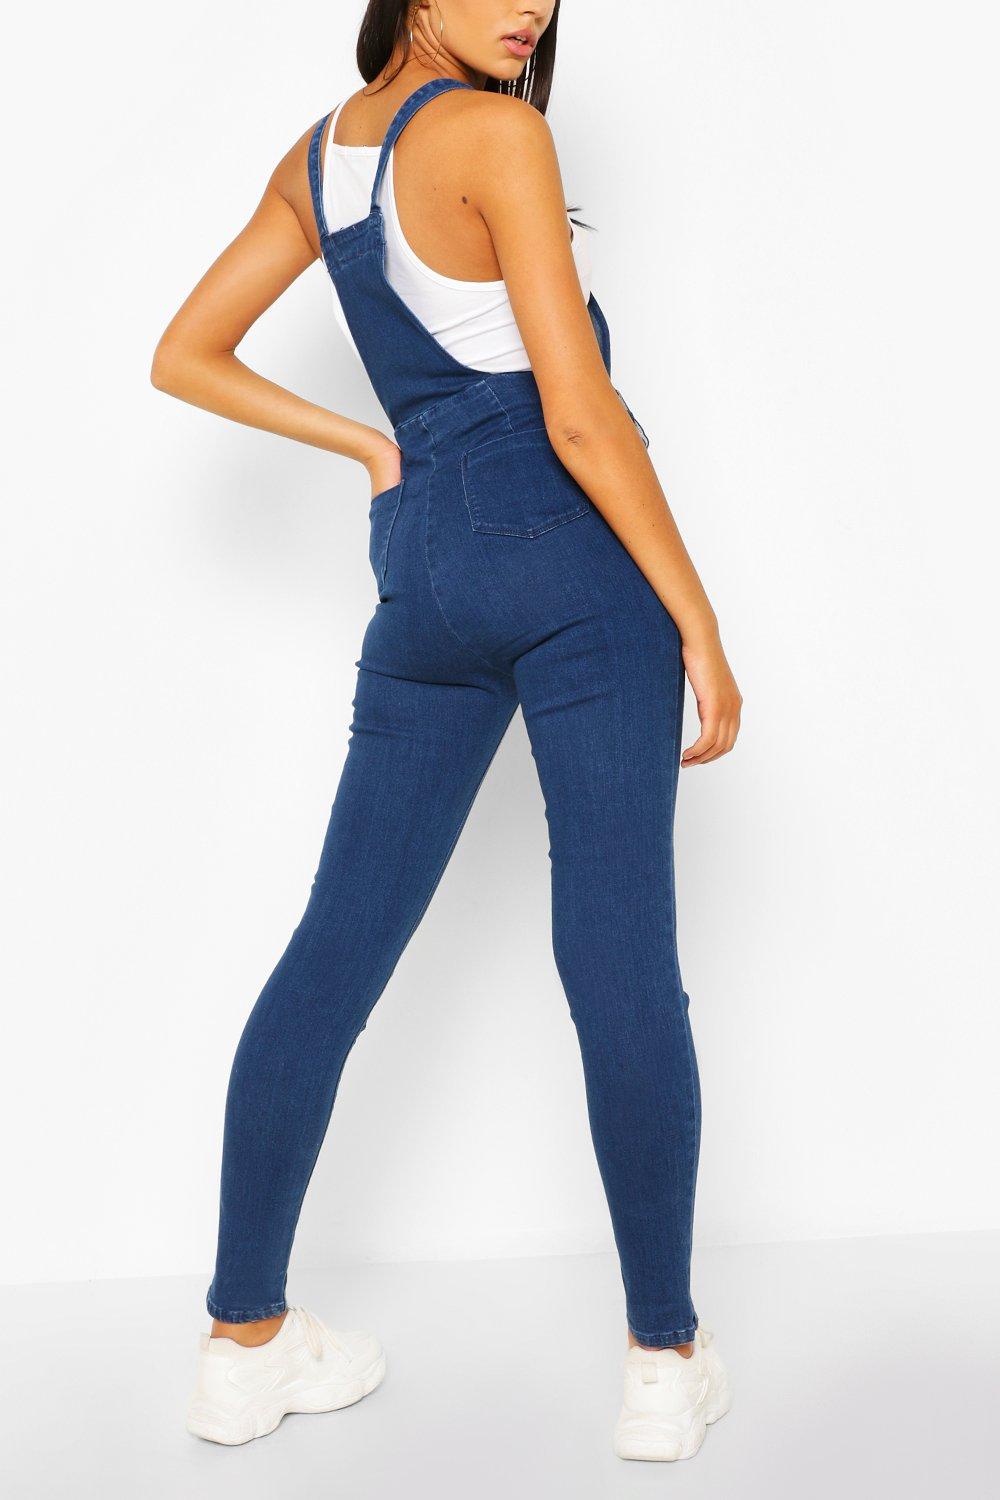 slim fit overalls womens